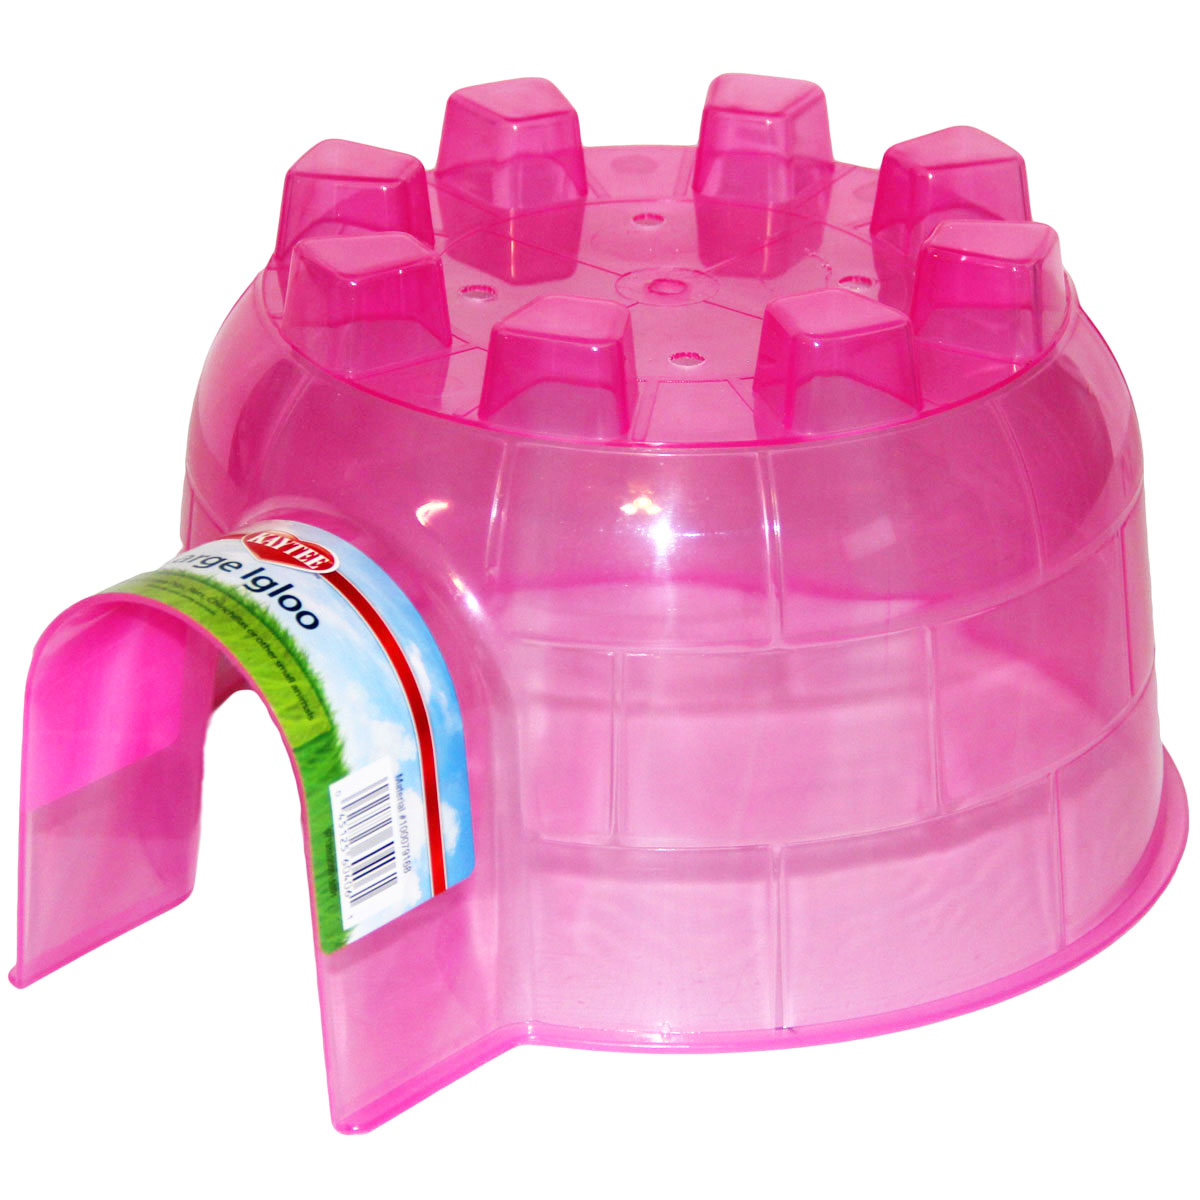 Plastic Pigloos - Igloos for guinea pigs